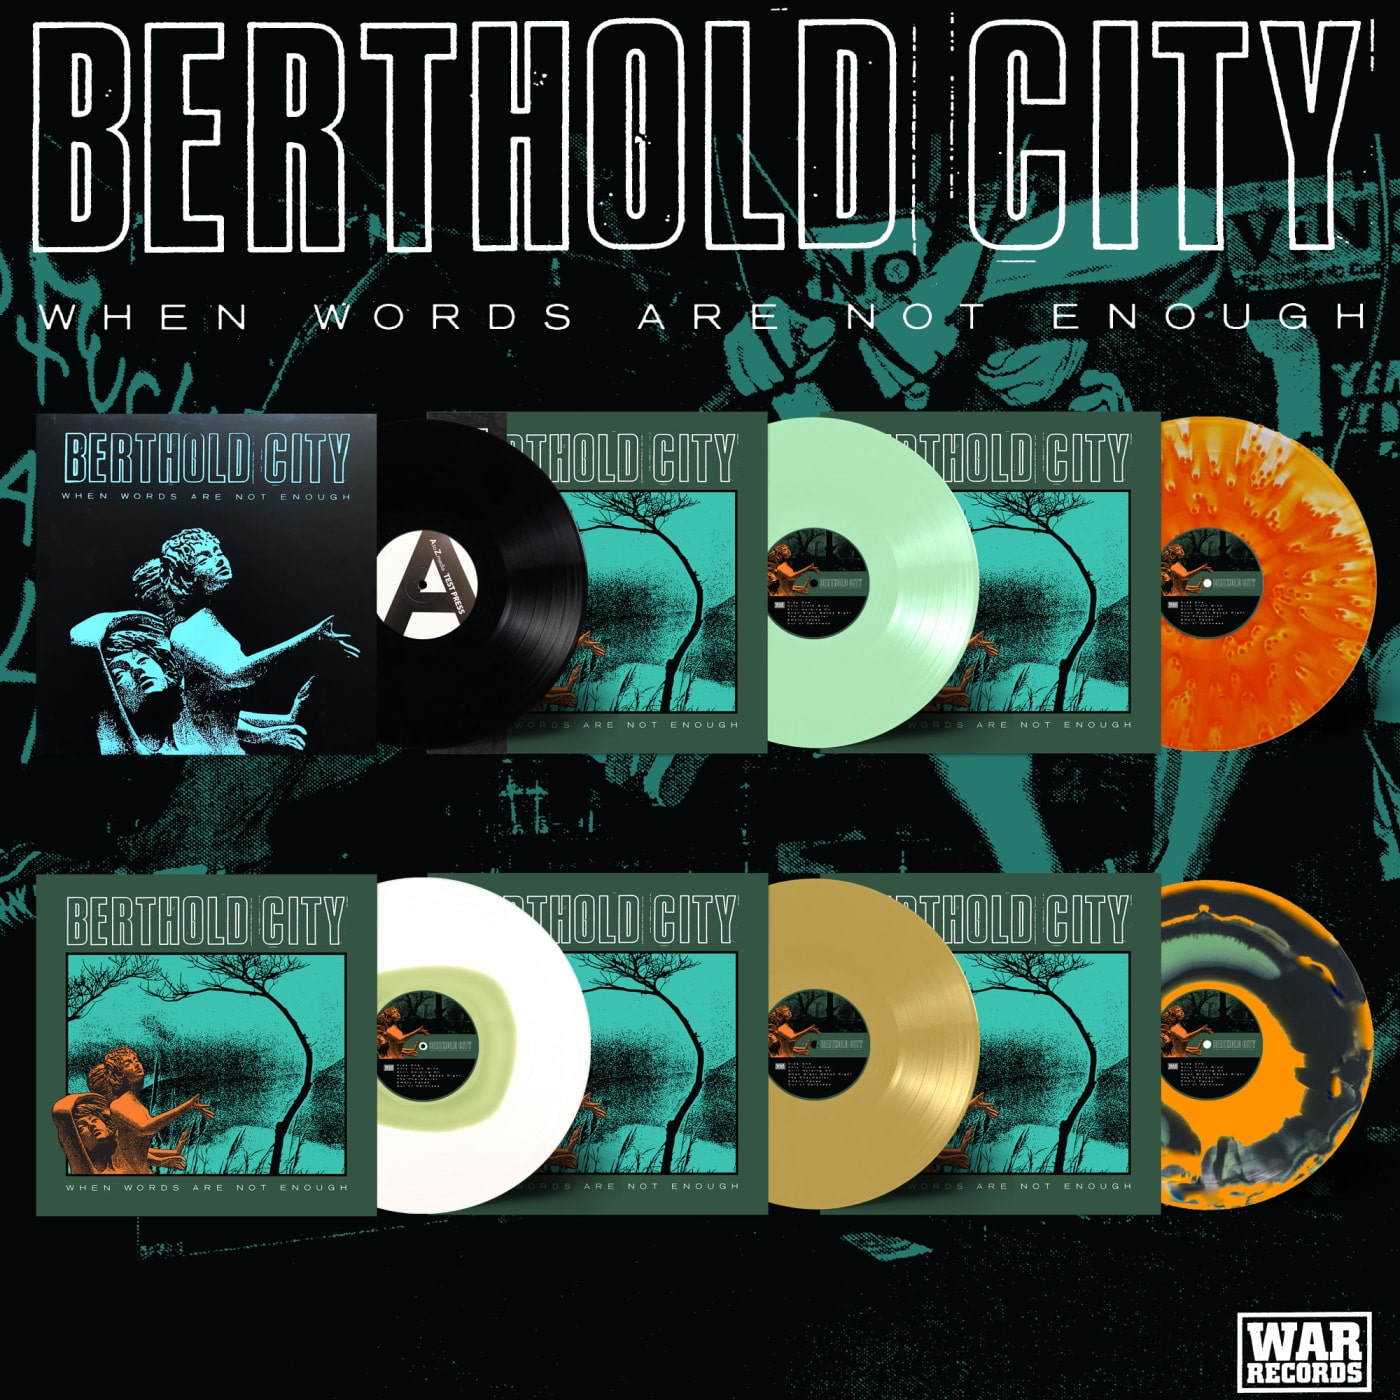 BERTHOLD CITY When Words Are Not Enough variants